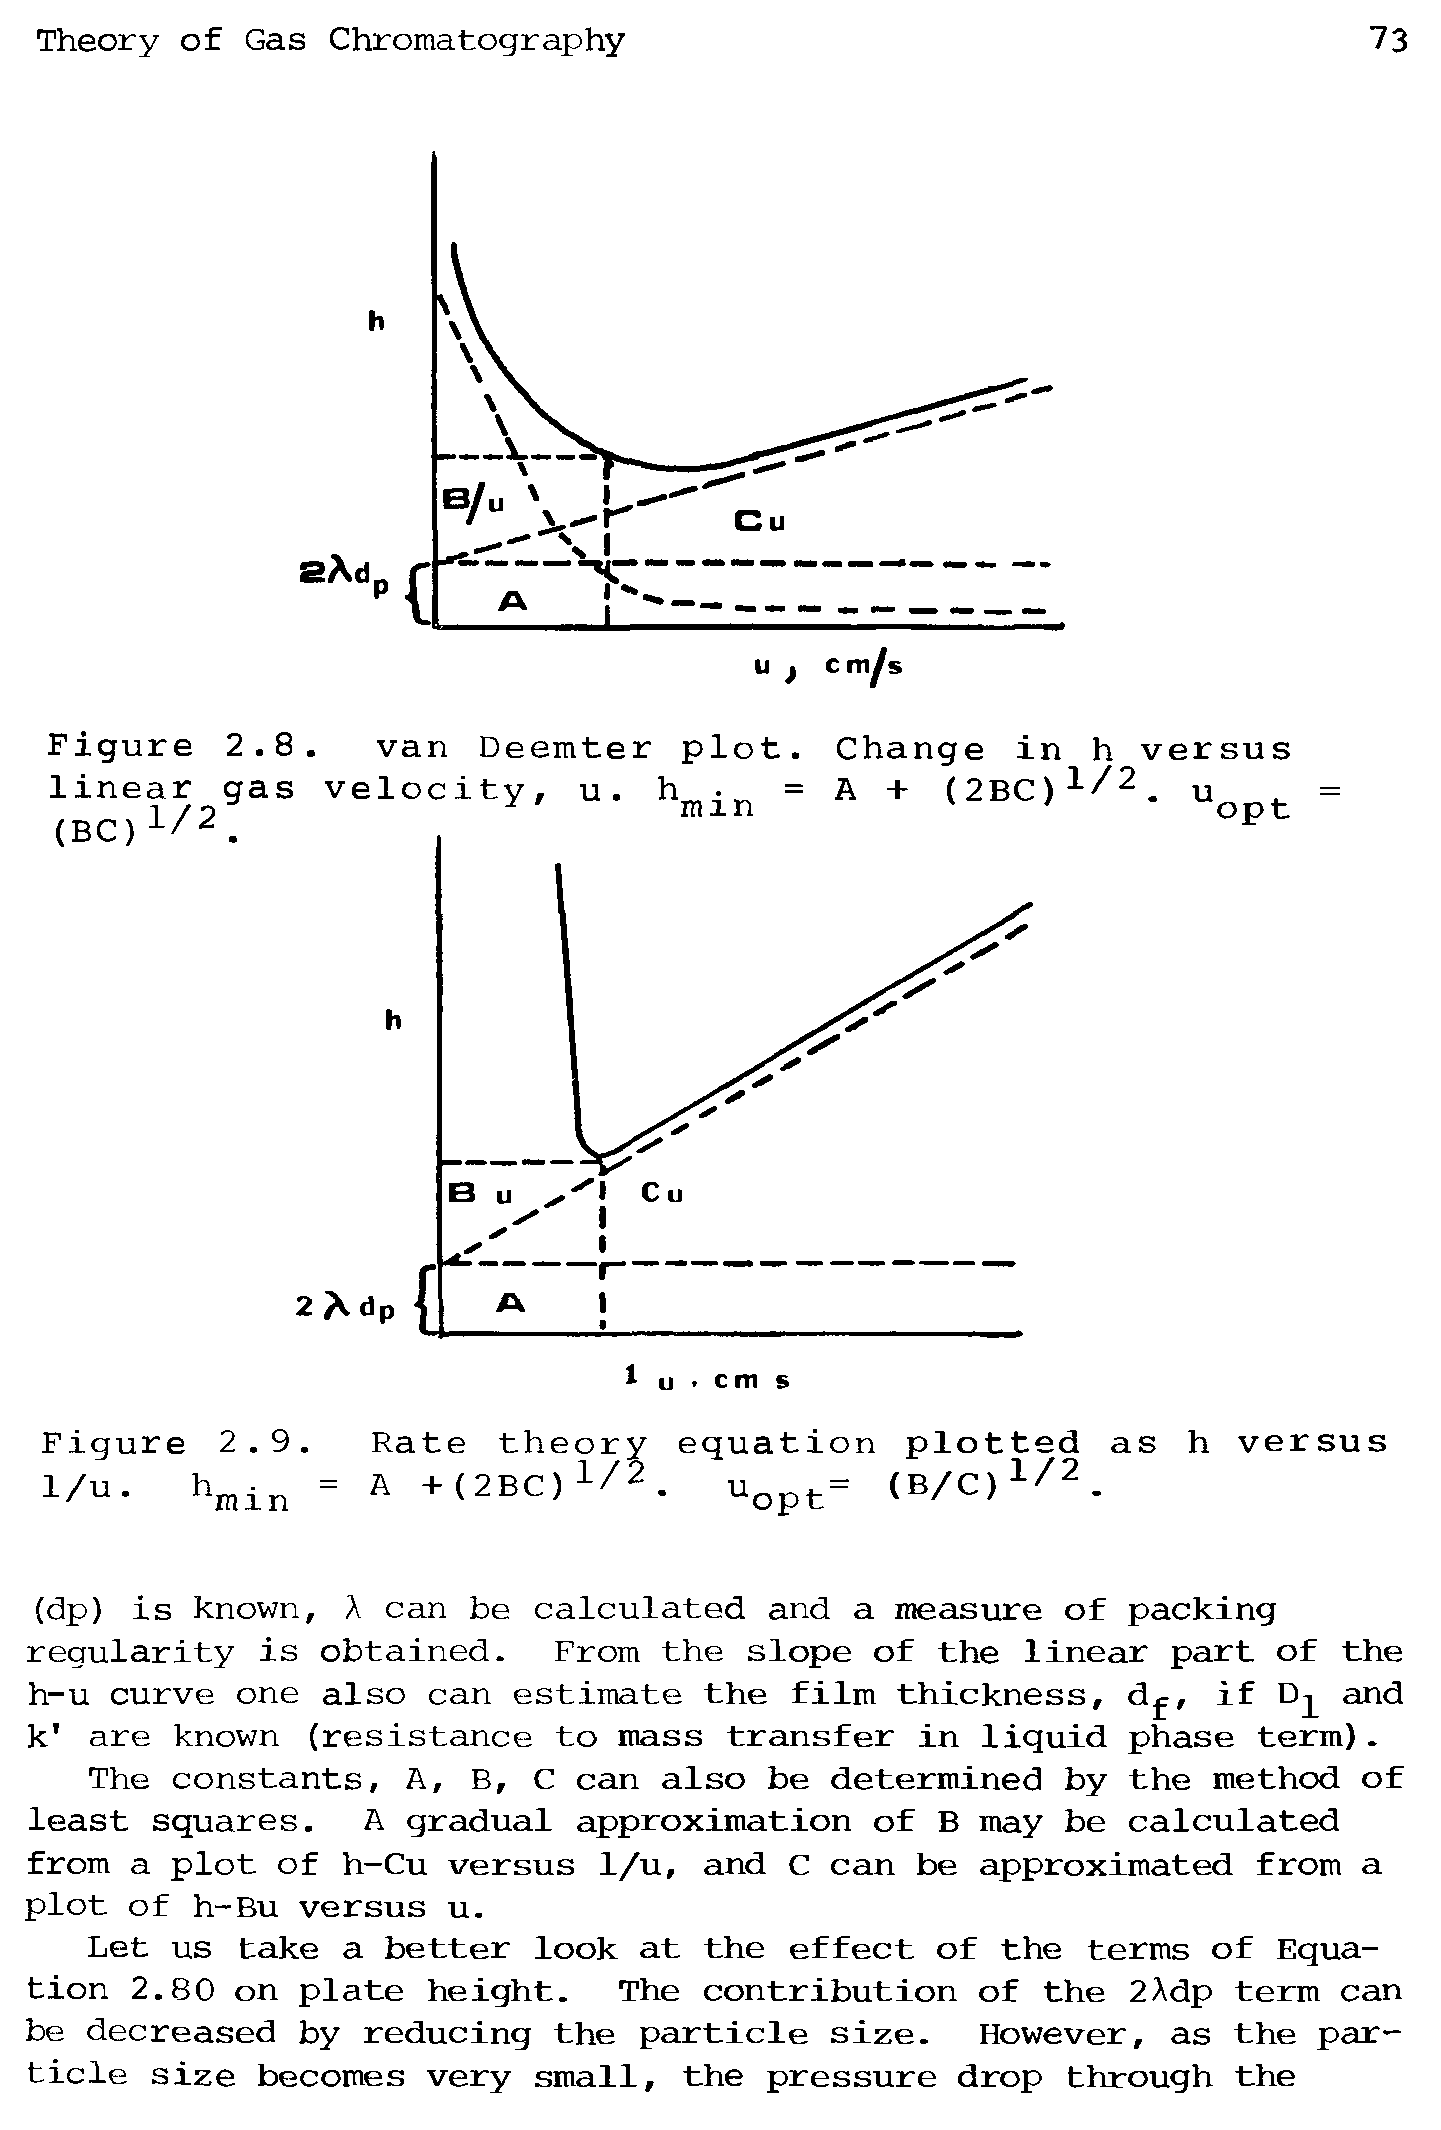 Figure 2.9. Rate theory equation plotted as h versus 1/u. hmin = A +(2BC)1/2. uopt = (B/C)1/2.